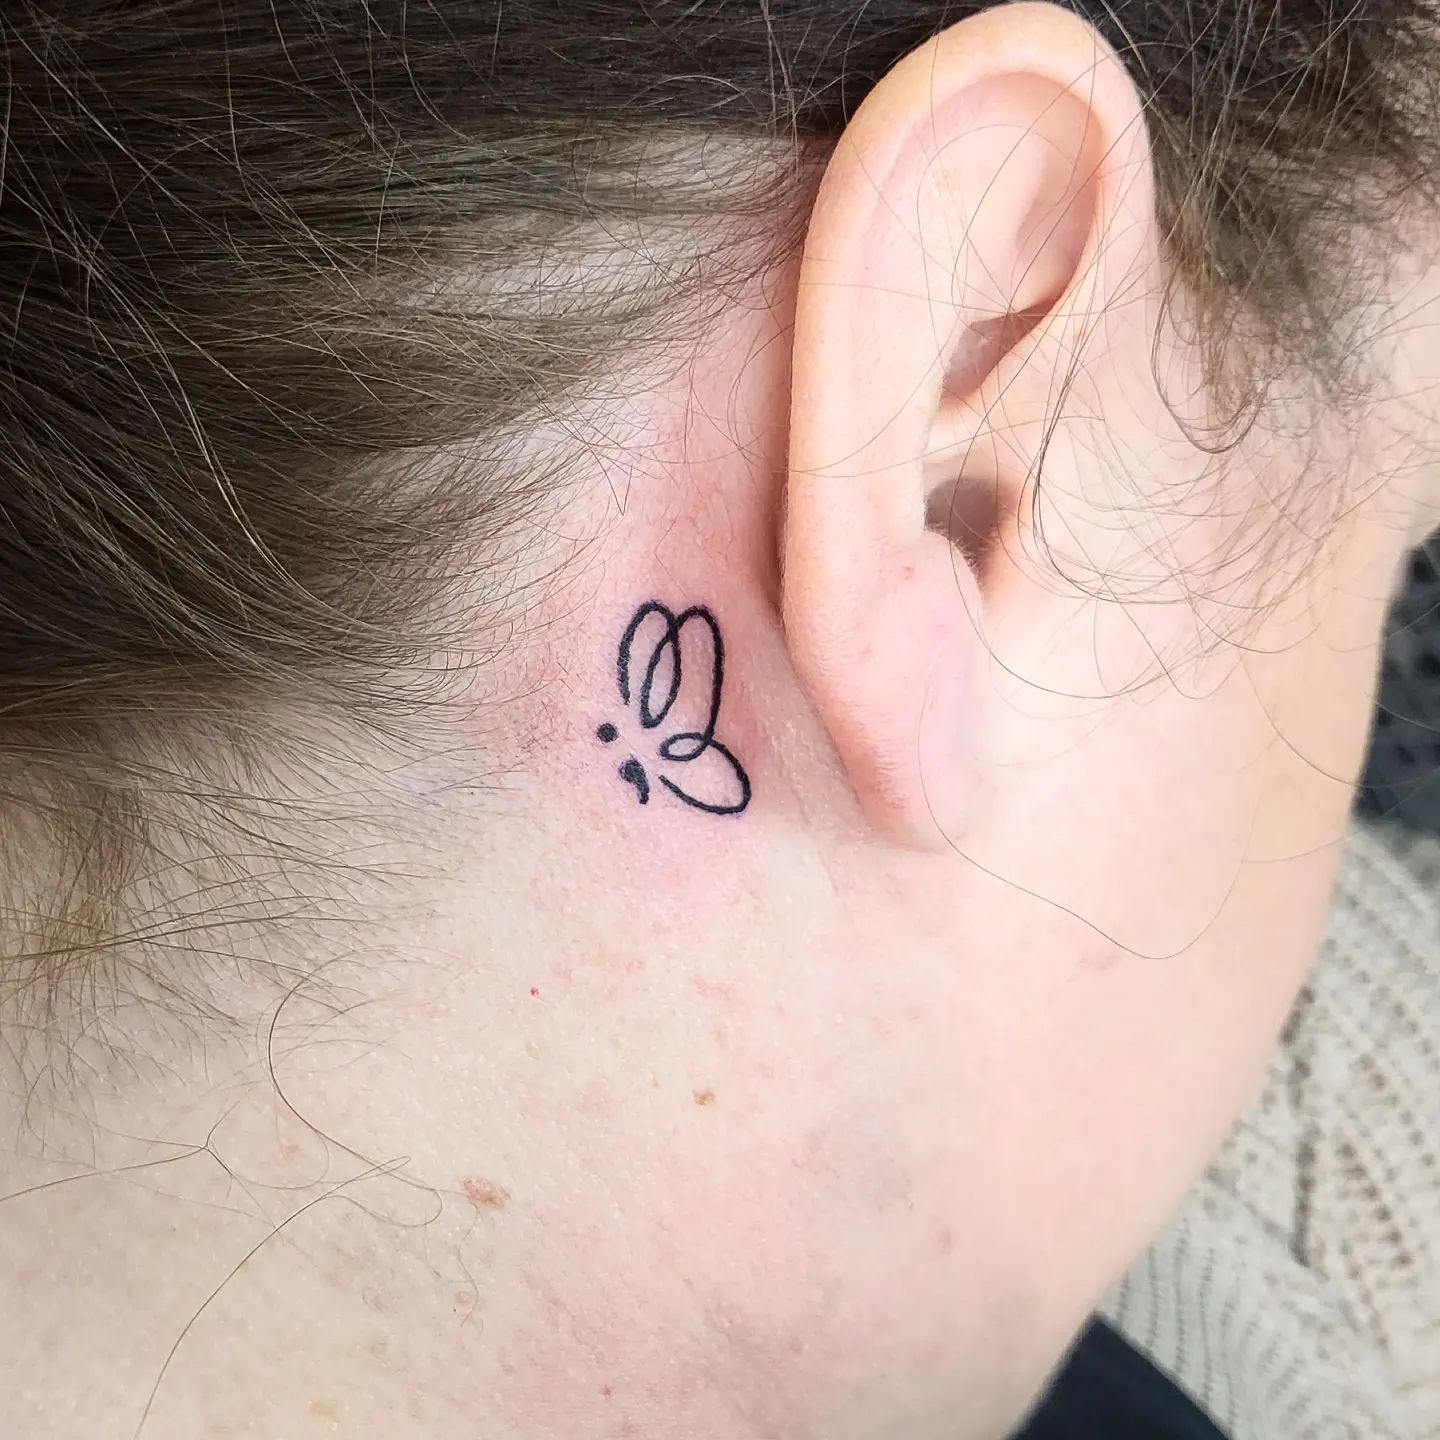 30+ Meaningful Semicolon Tattoos for Women and Men - 100 Tattoos